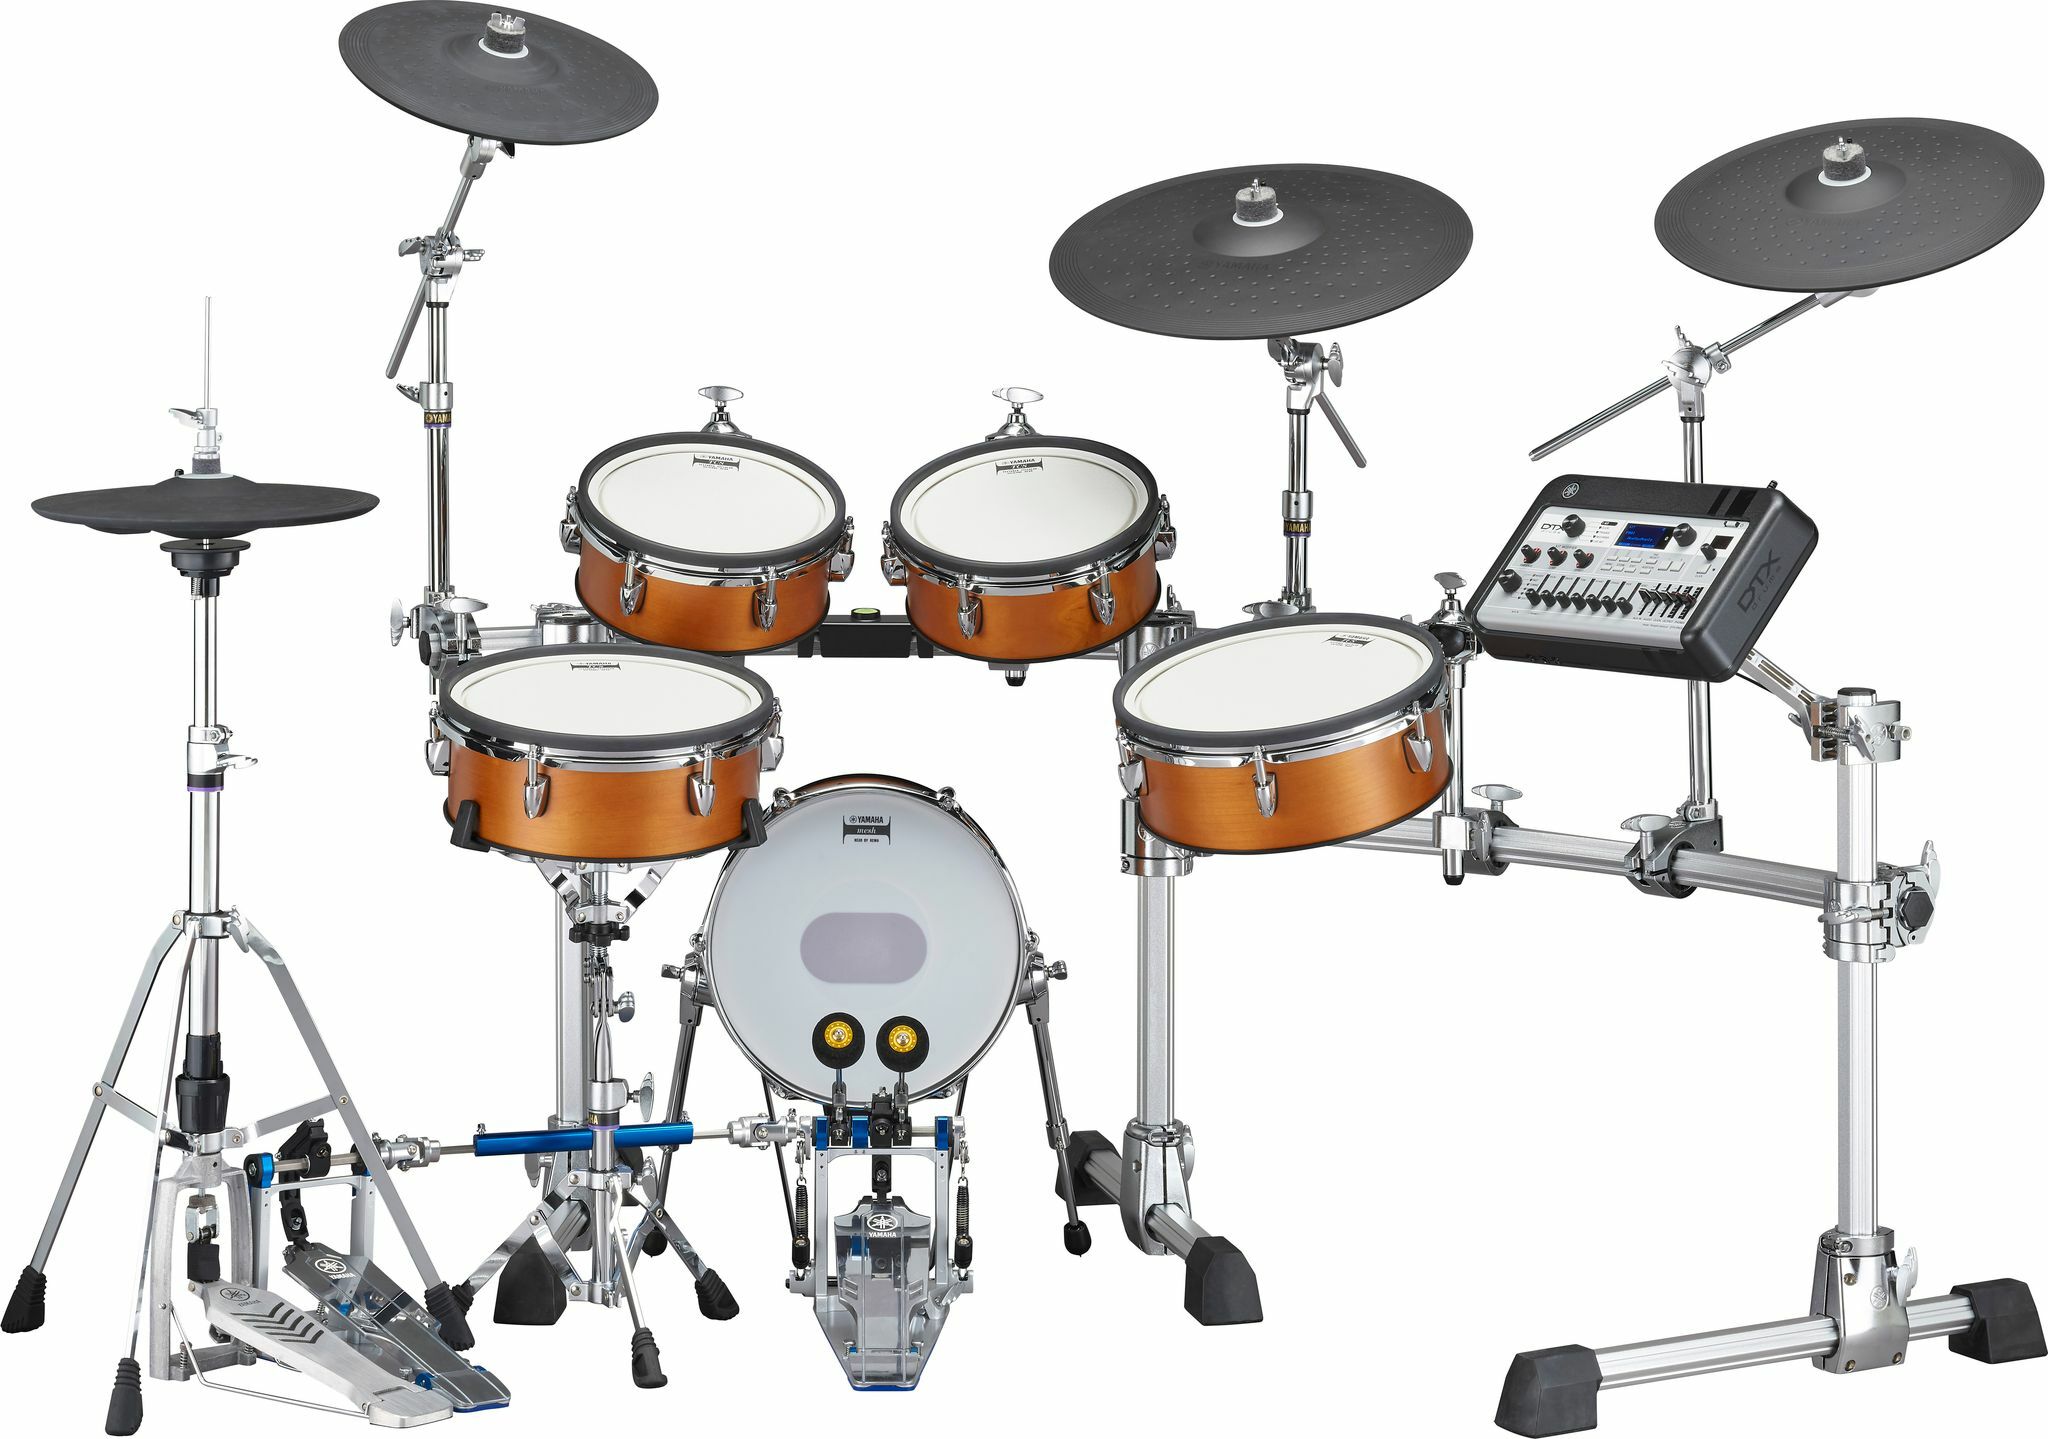 Yamaha Dtx10-kx Electronic Drum Kit Real Wood - Batería electrónica completa - Main picture